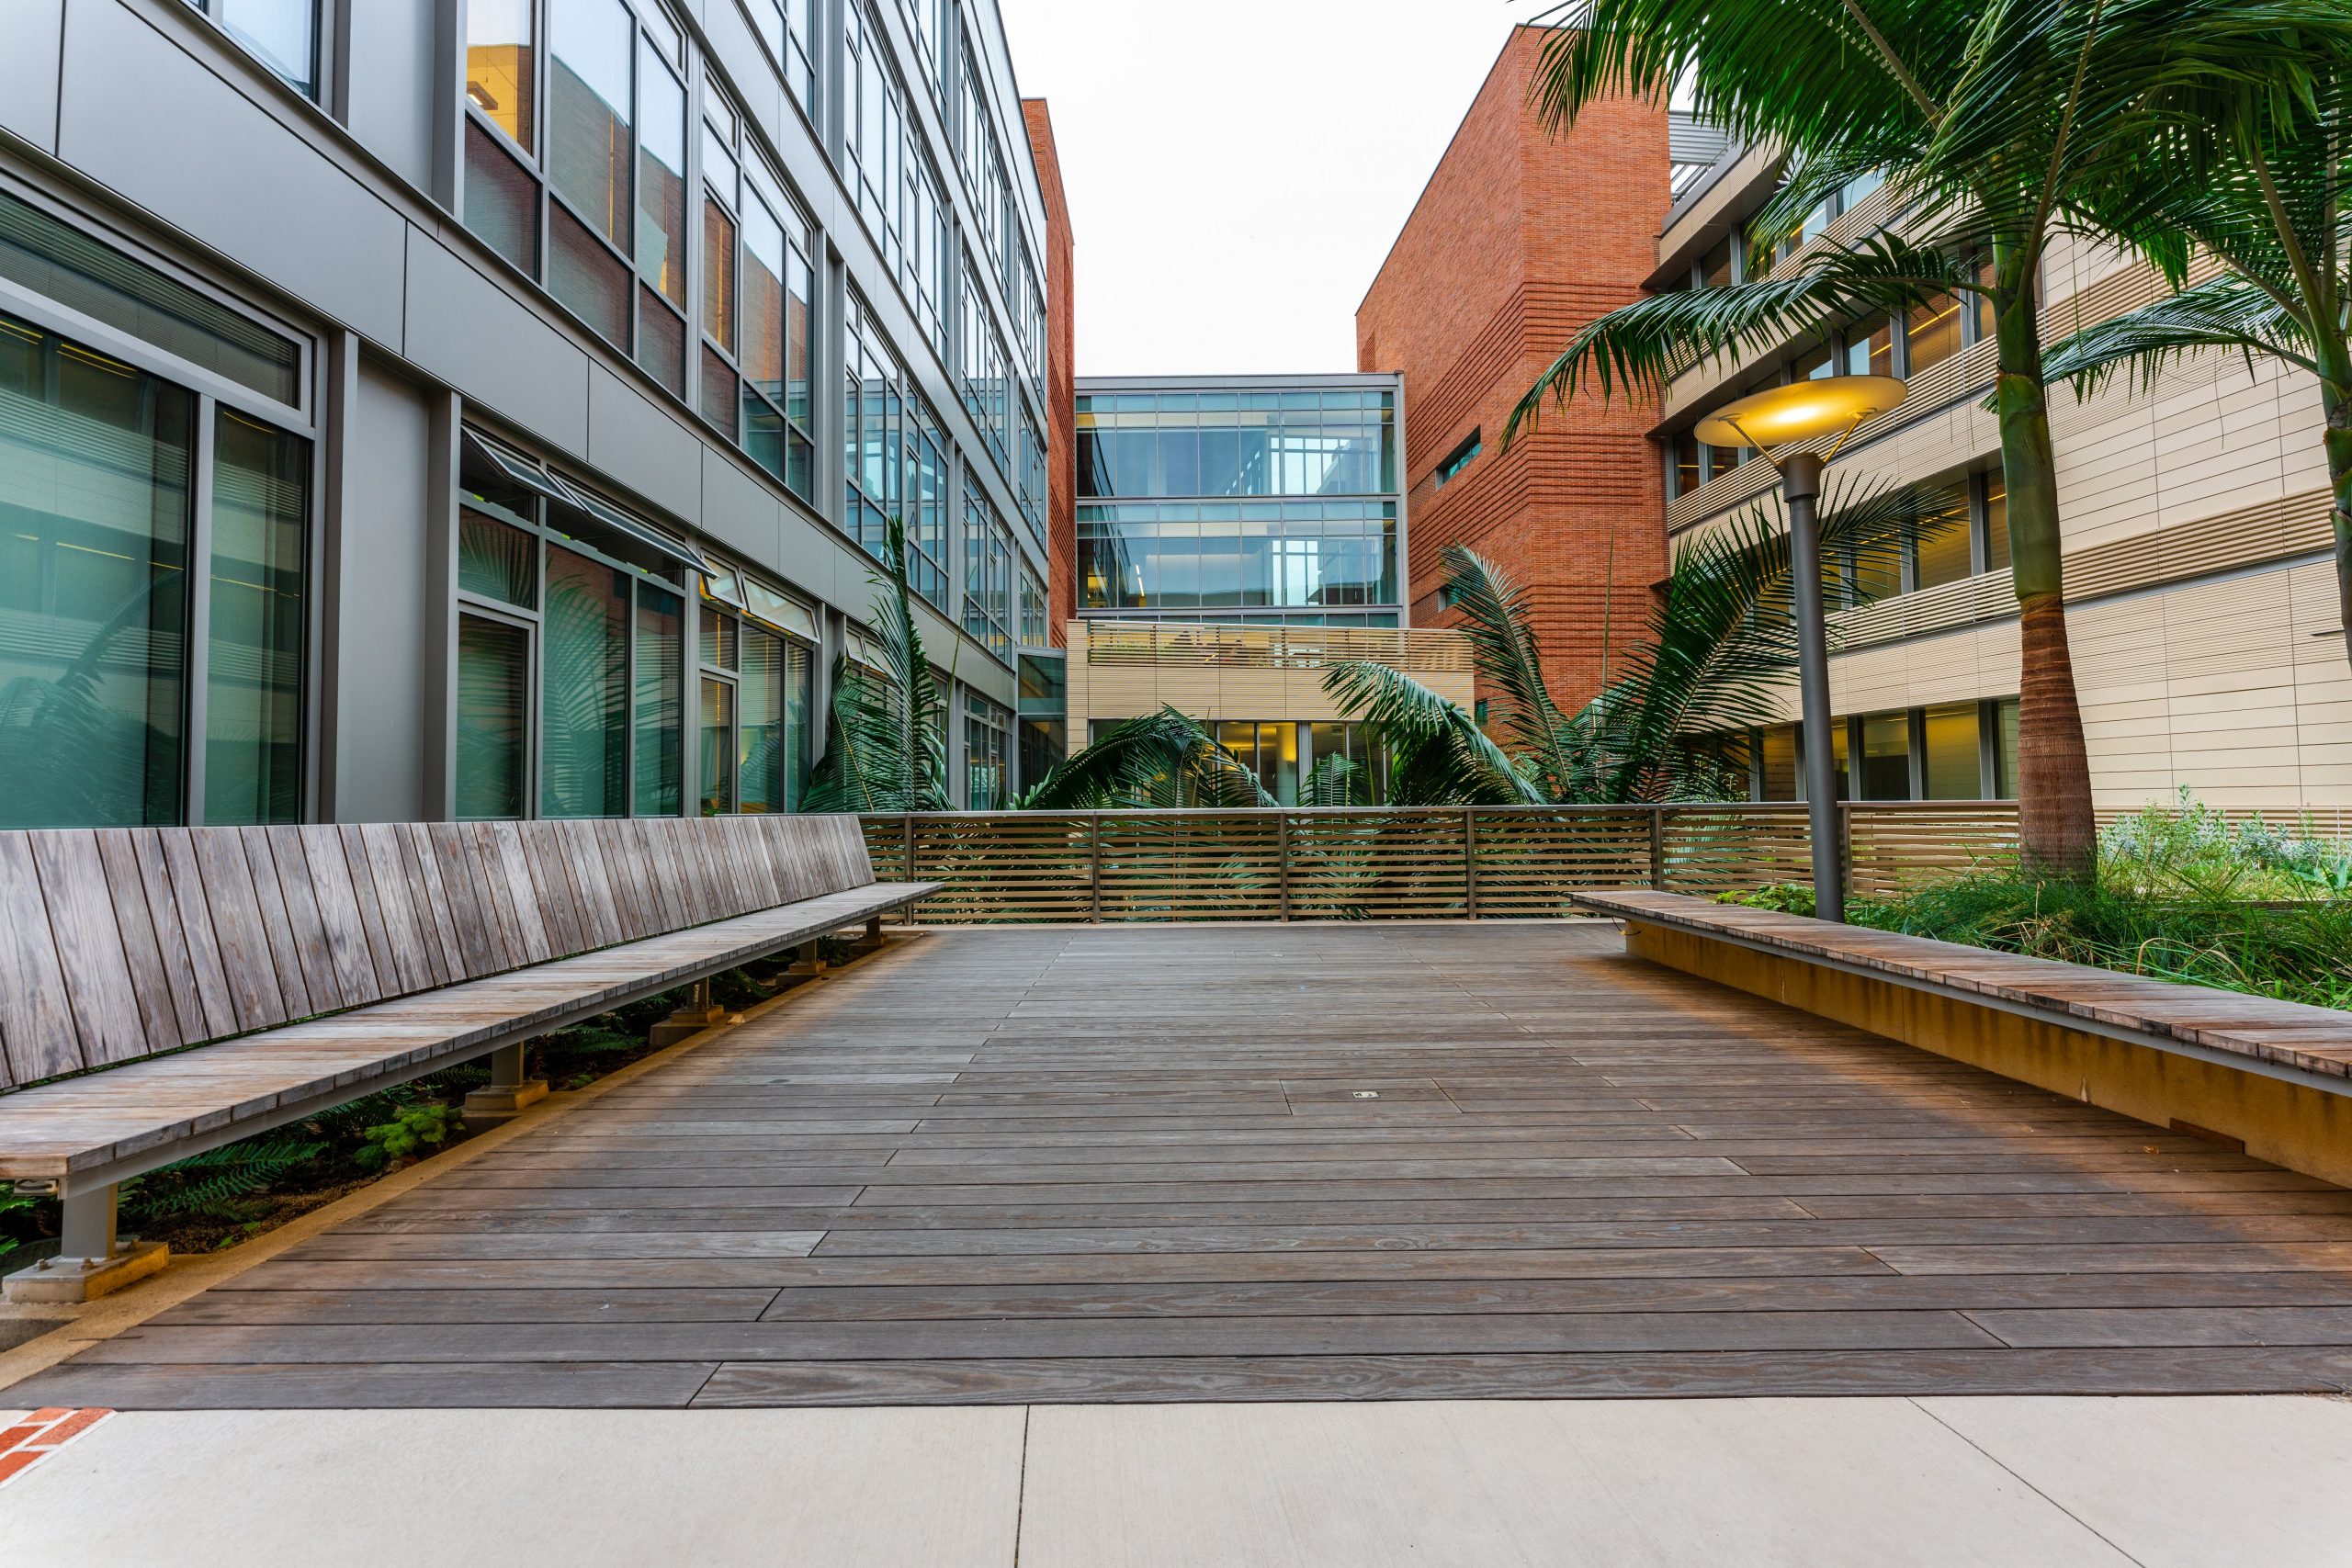 Side view of the UCLA Computer Sciences Department building in Los Angeles, California featuring Kebony Modified Wood Clear Decking used in the deck area outside the building